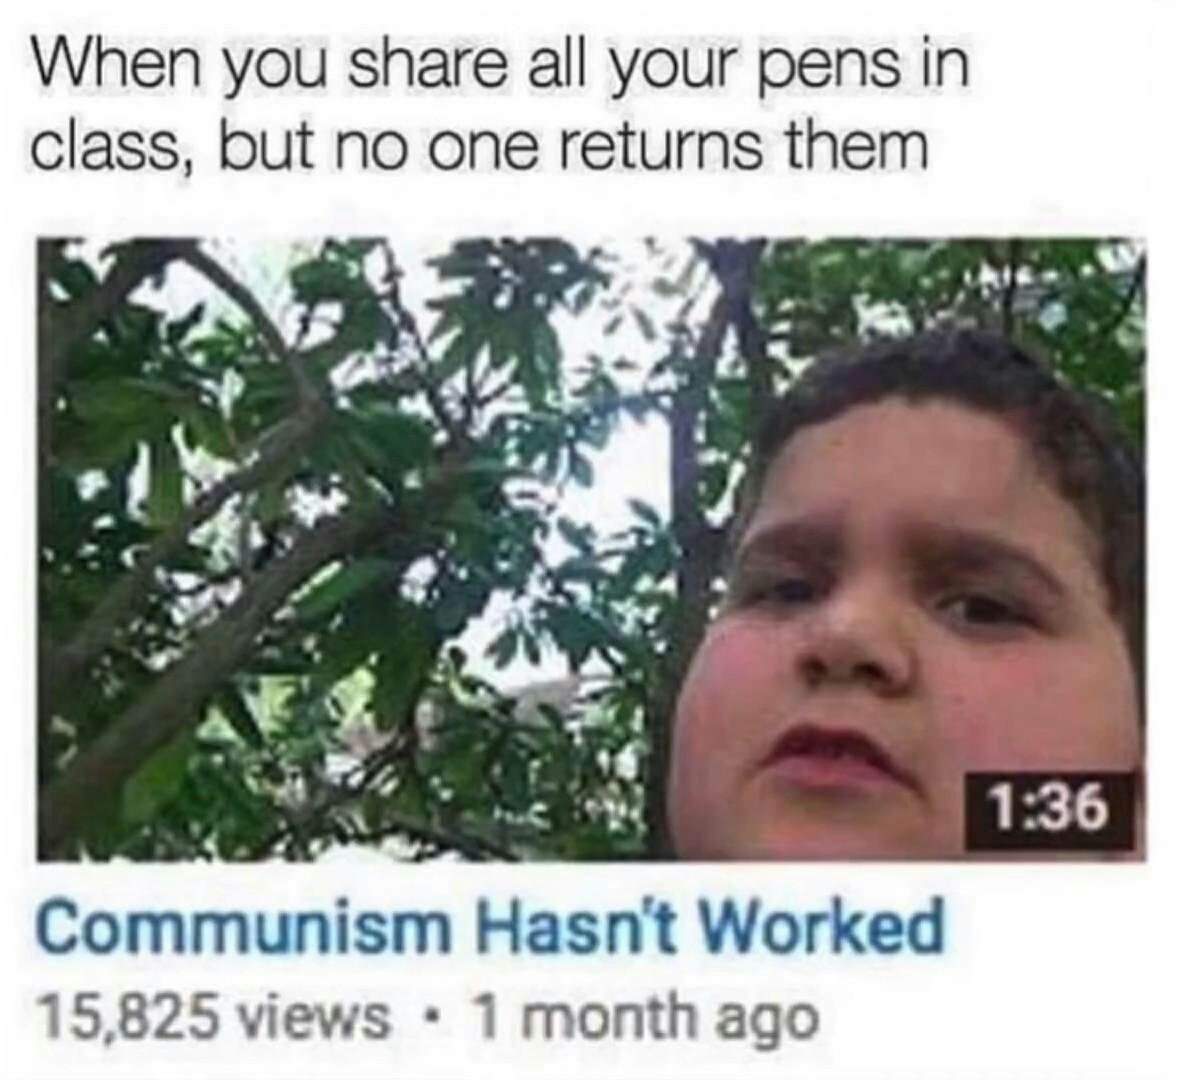 communism hasnt worked meme - When you all your pens in class, but no one returns them Communism Hasn't Worked 15,825 views 1 month ago